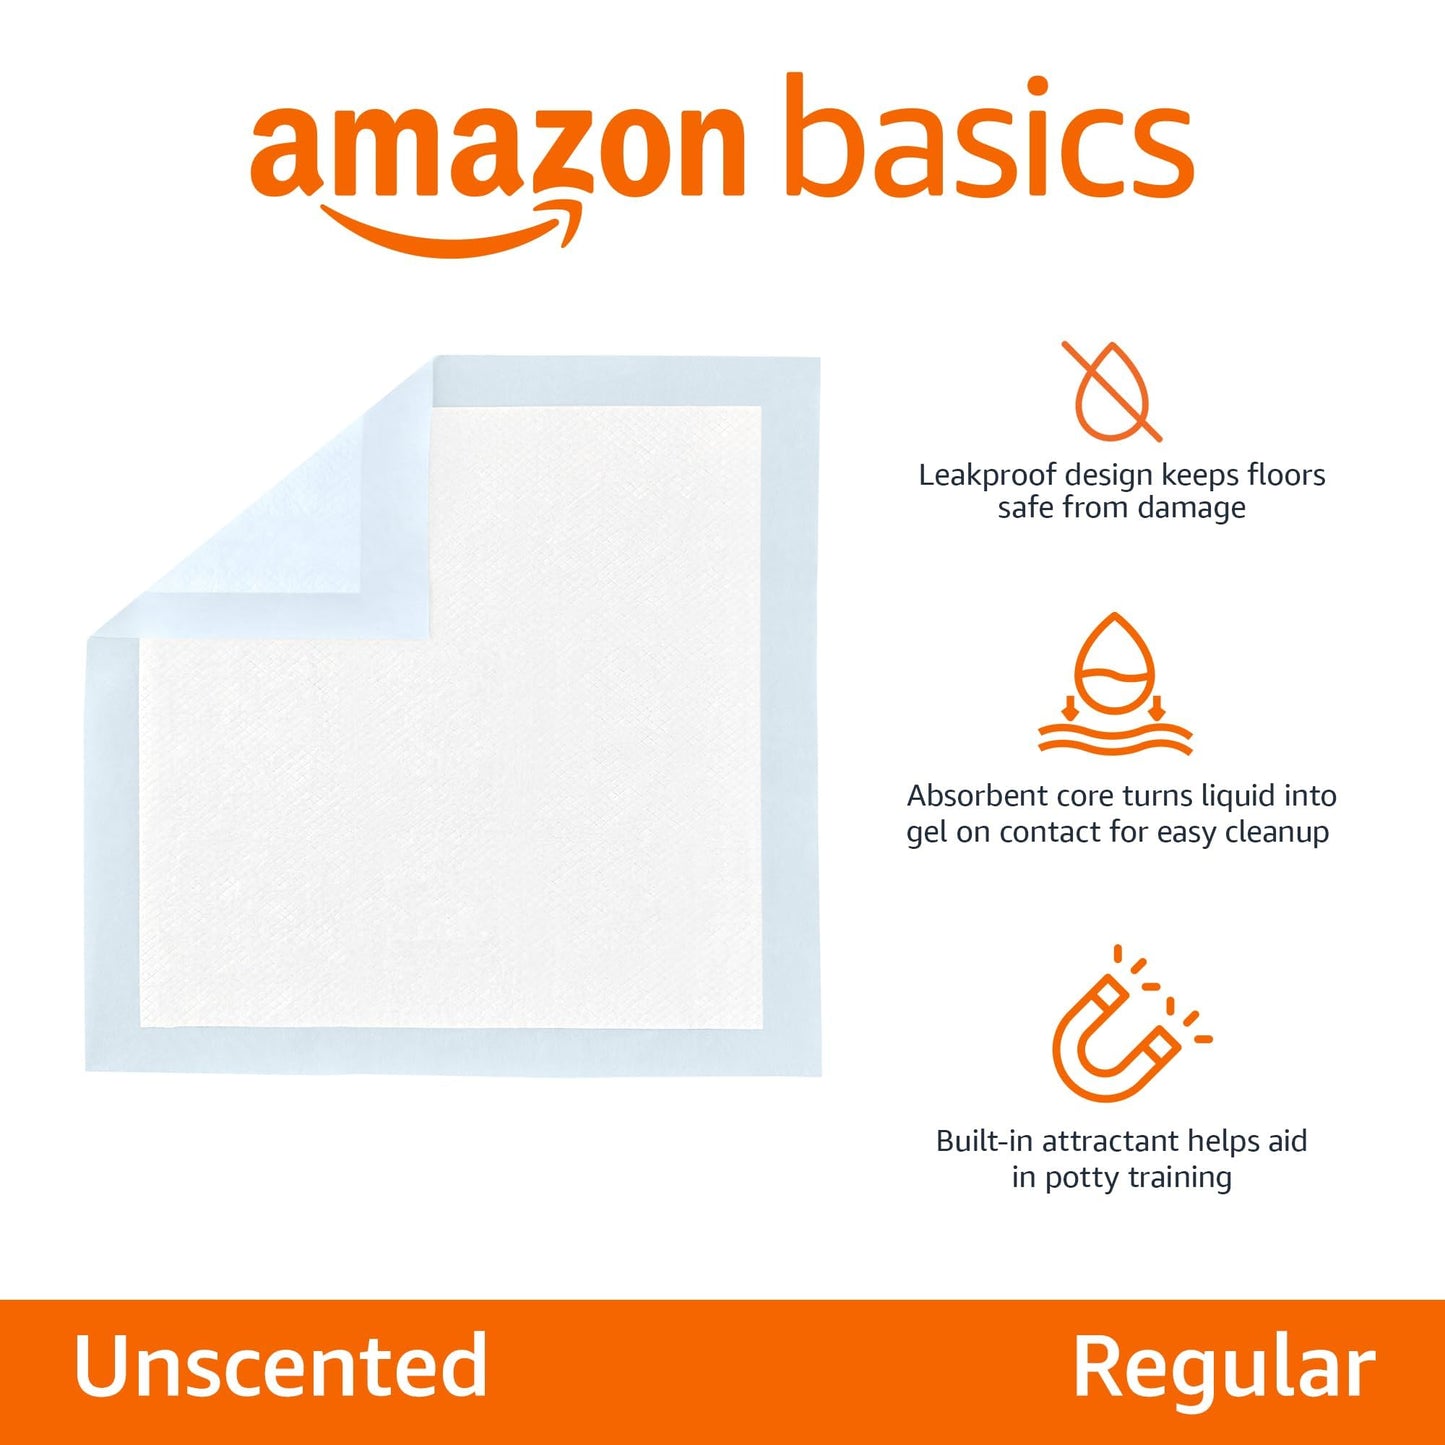 Amazon Basics Dog and Puppy Pee Pads with Leak-Proof Quick-Dry Design for Potty Training, Standard Absorbency, Regular Size, 22 x 22 Inches, Pack of 100, Blue & White - Like New